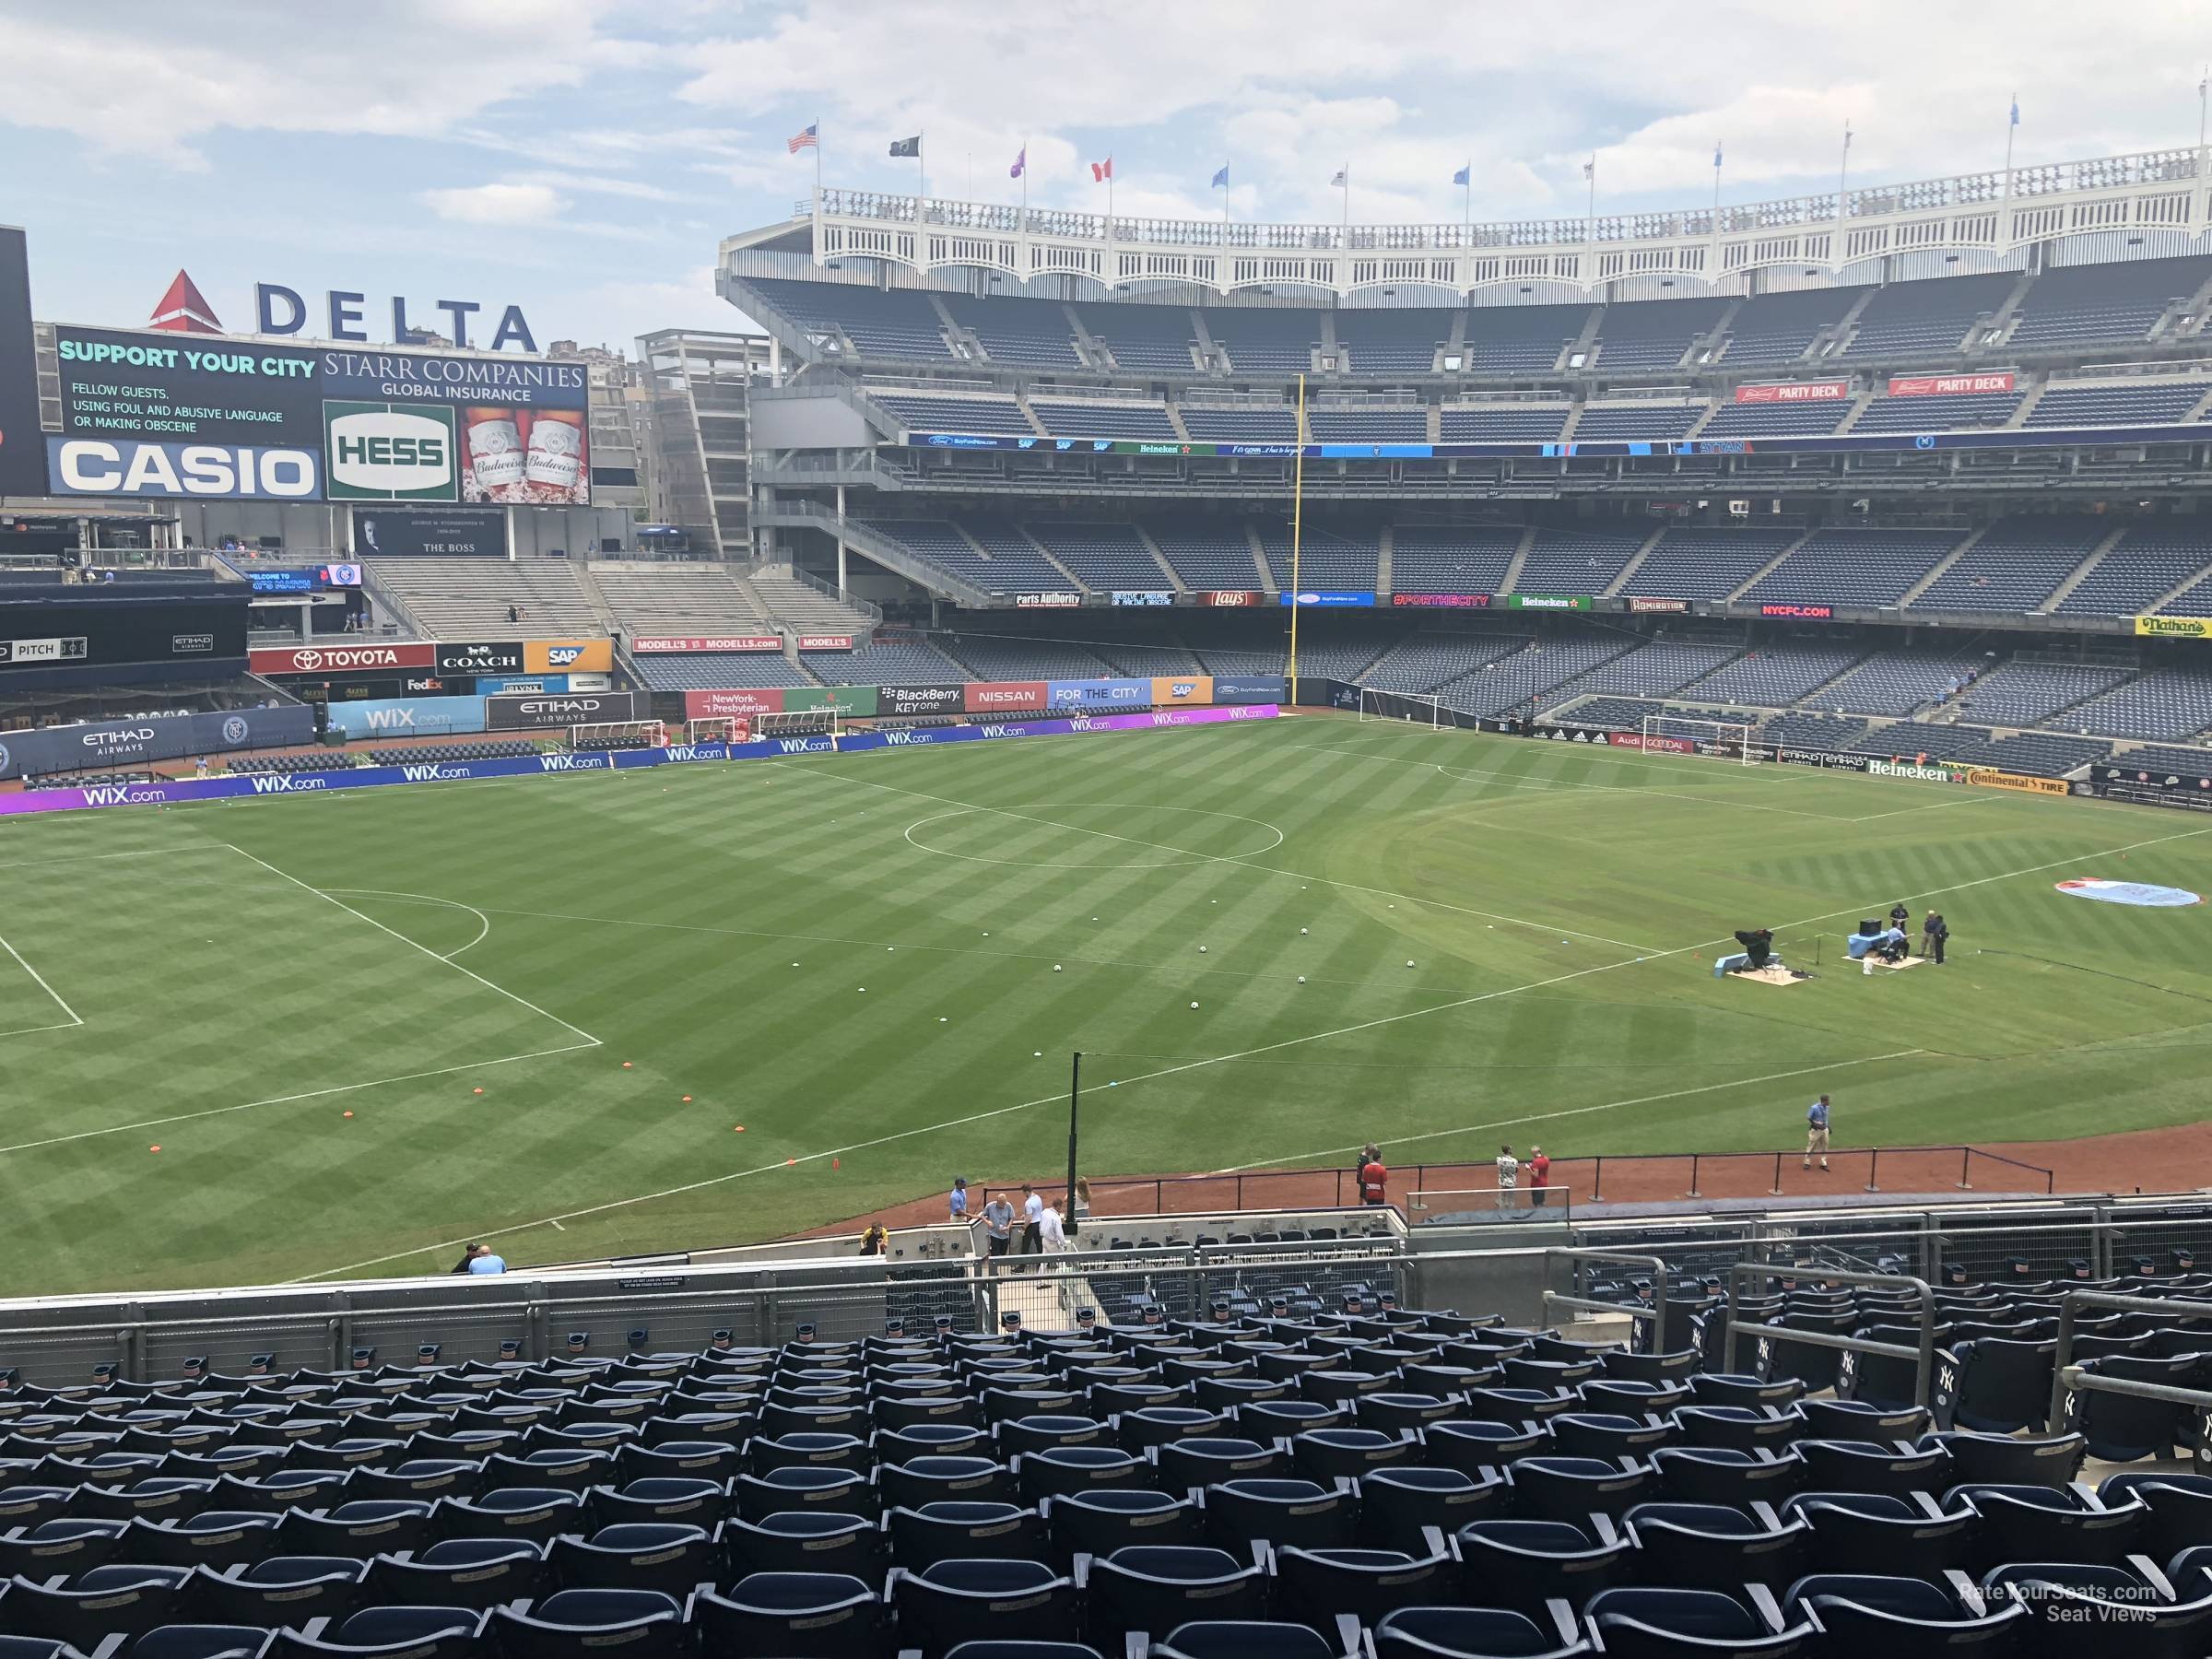 section 231, row 15 seat view  for soccer - yankee stadium